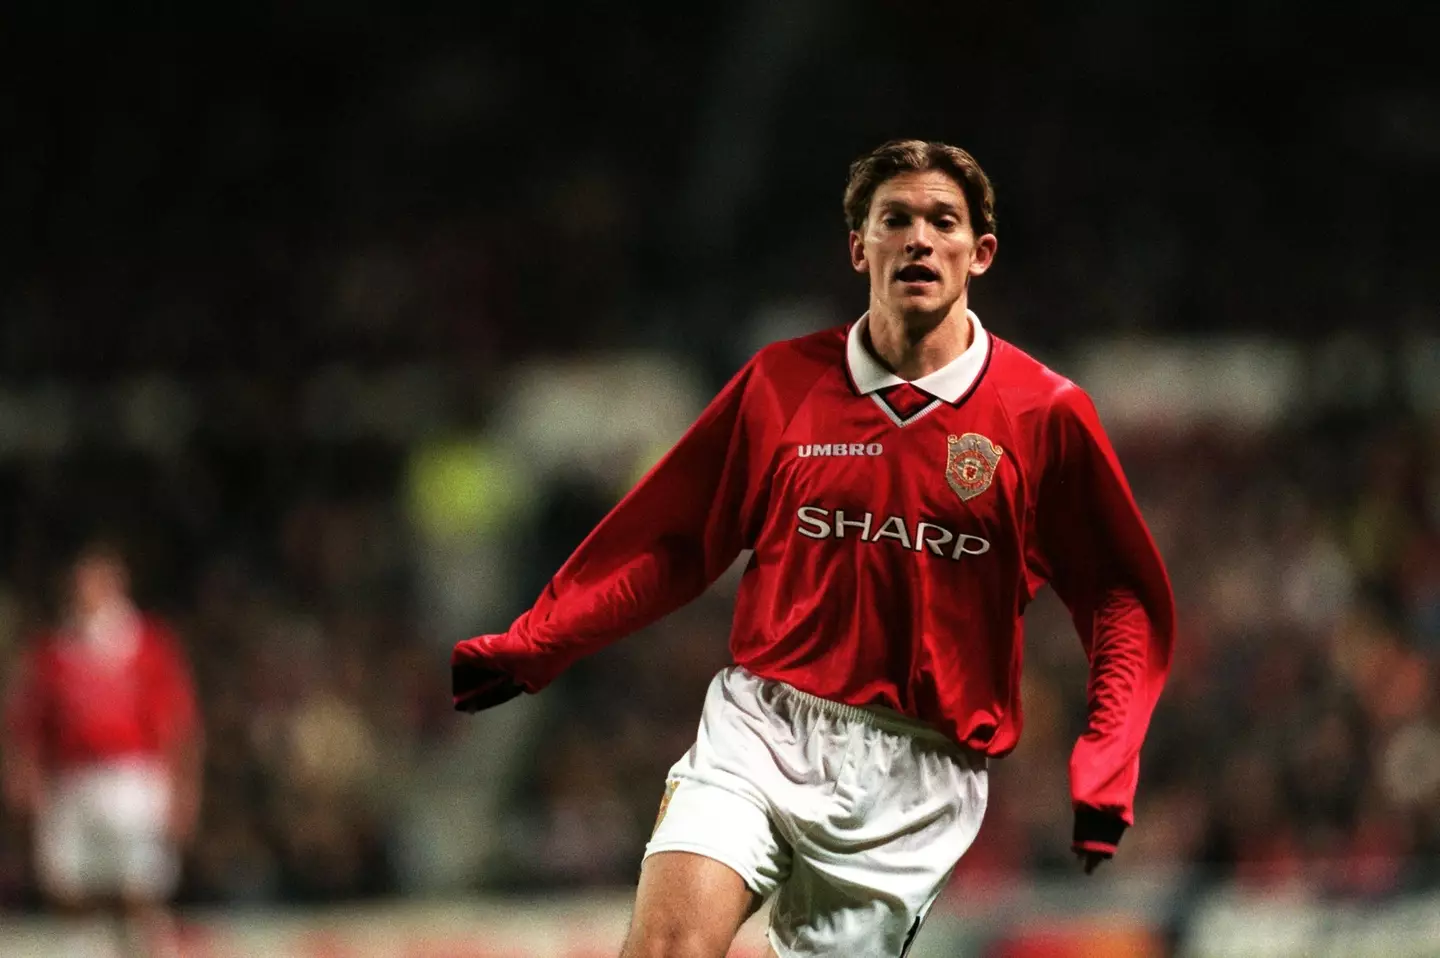 Blomqvist playing for United. Image: Alamy